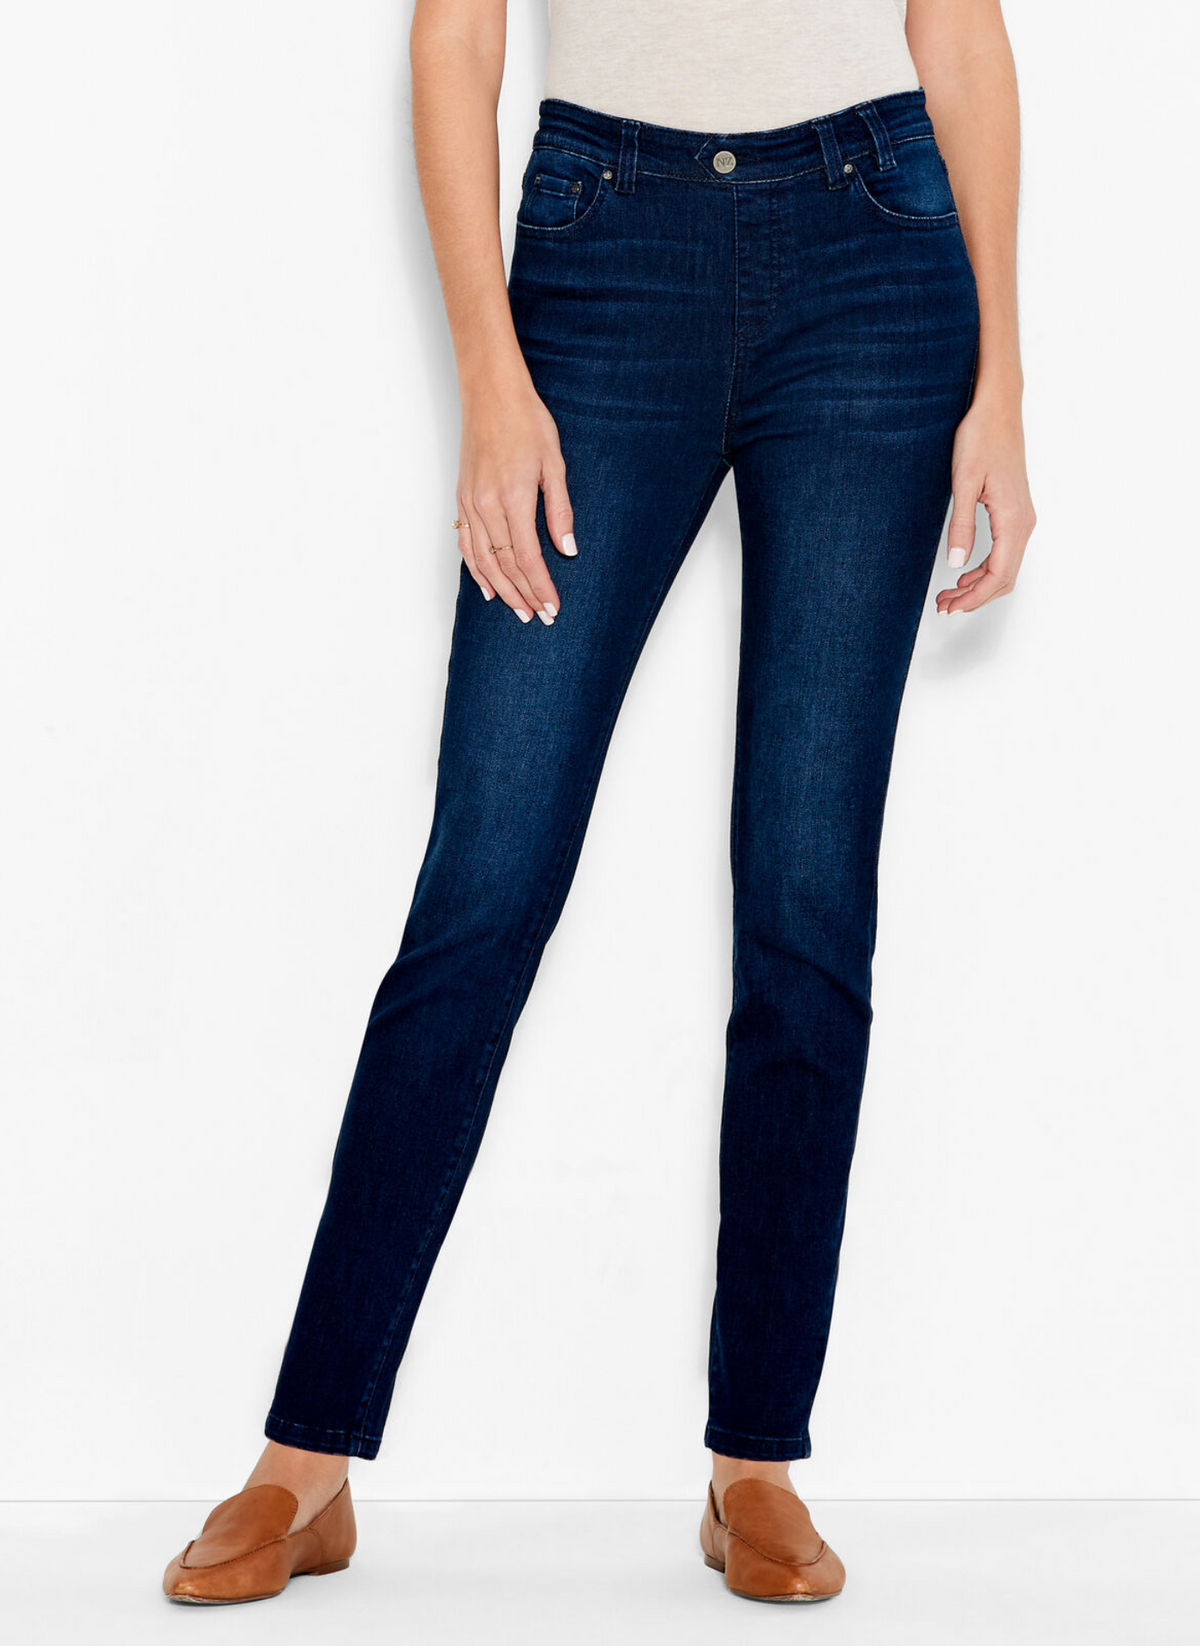 Twilight Mid Rise Slim Ankle Jeans – Just the Thing